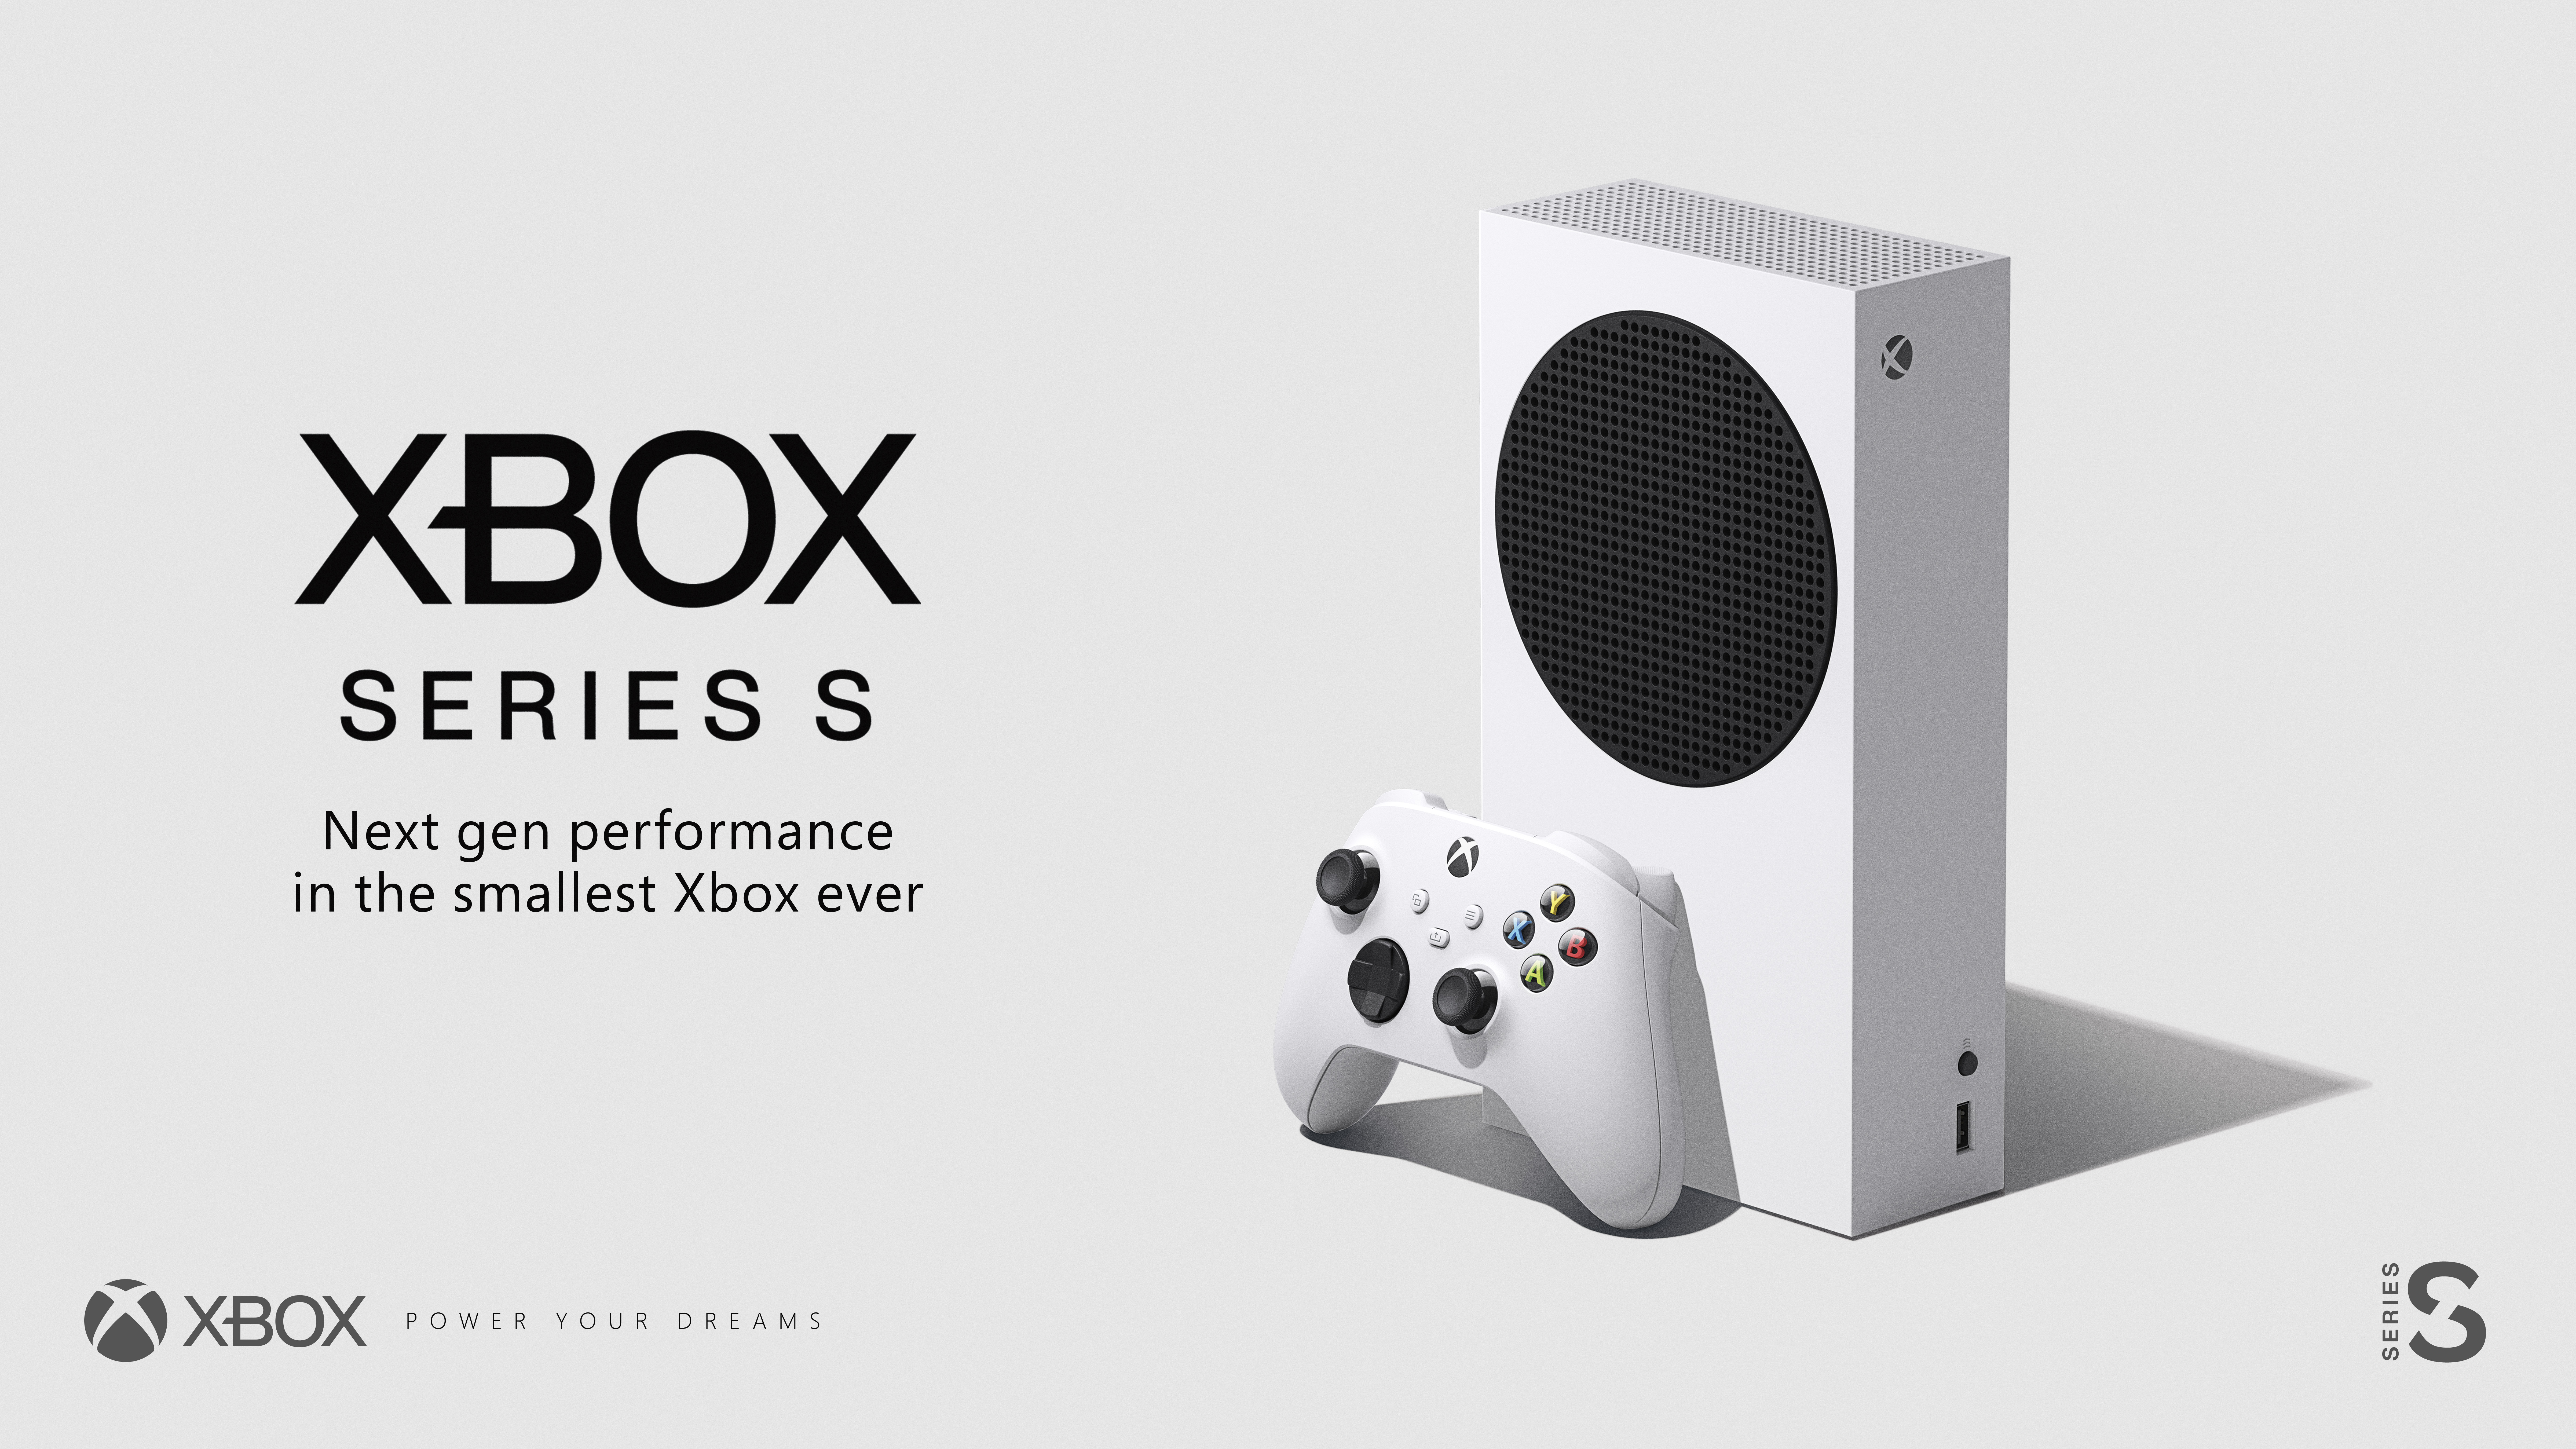 Xbox Series S Console 512 GB - Wit - GamesDirect®